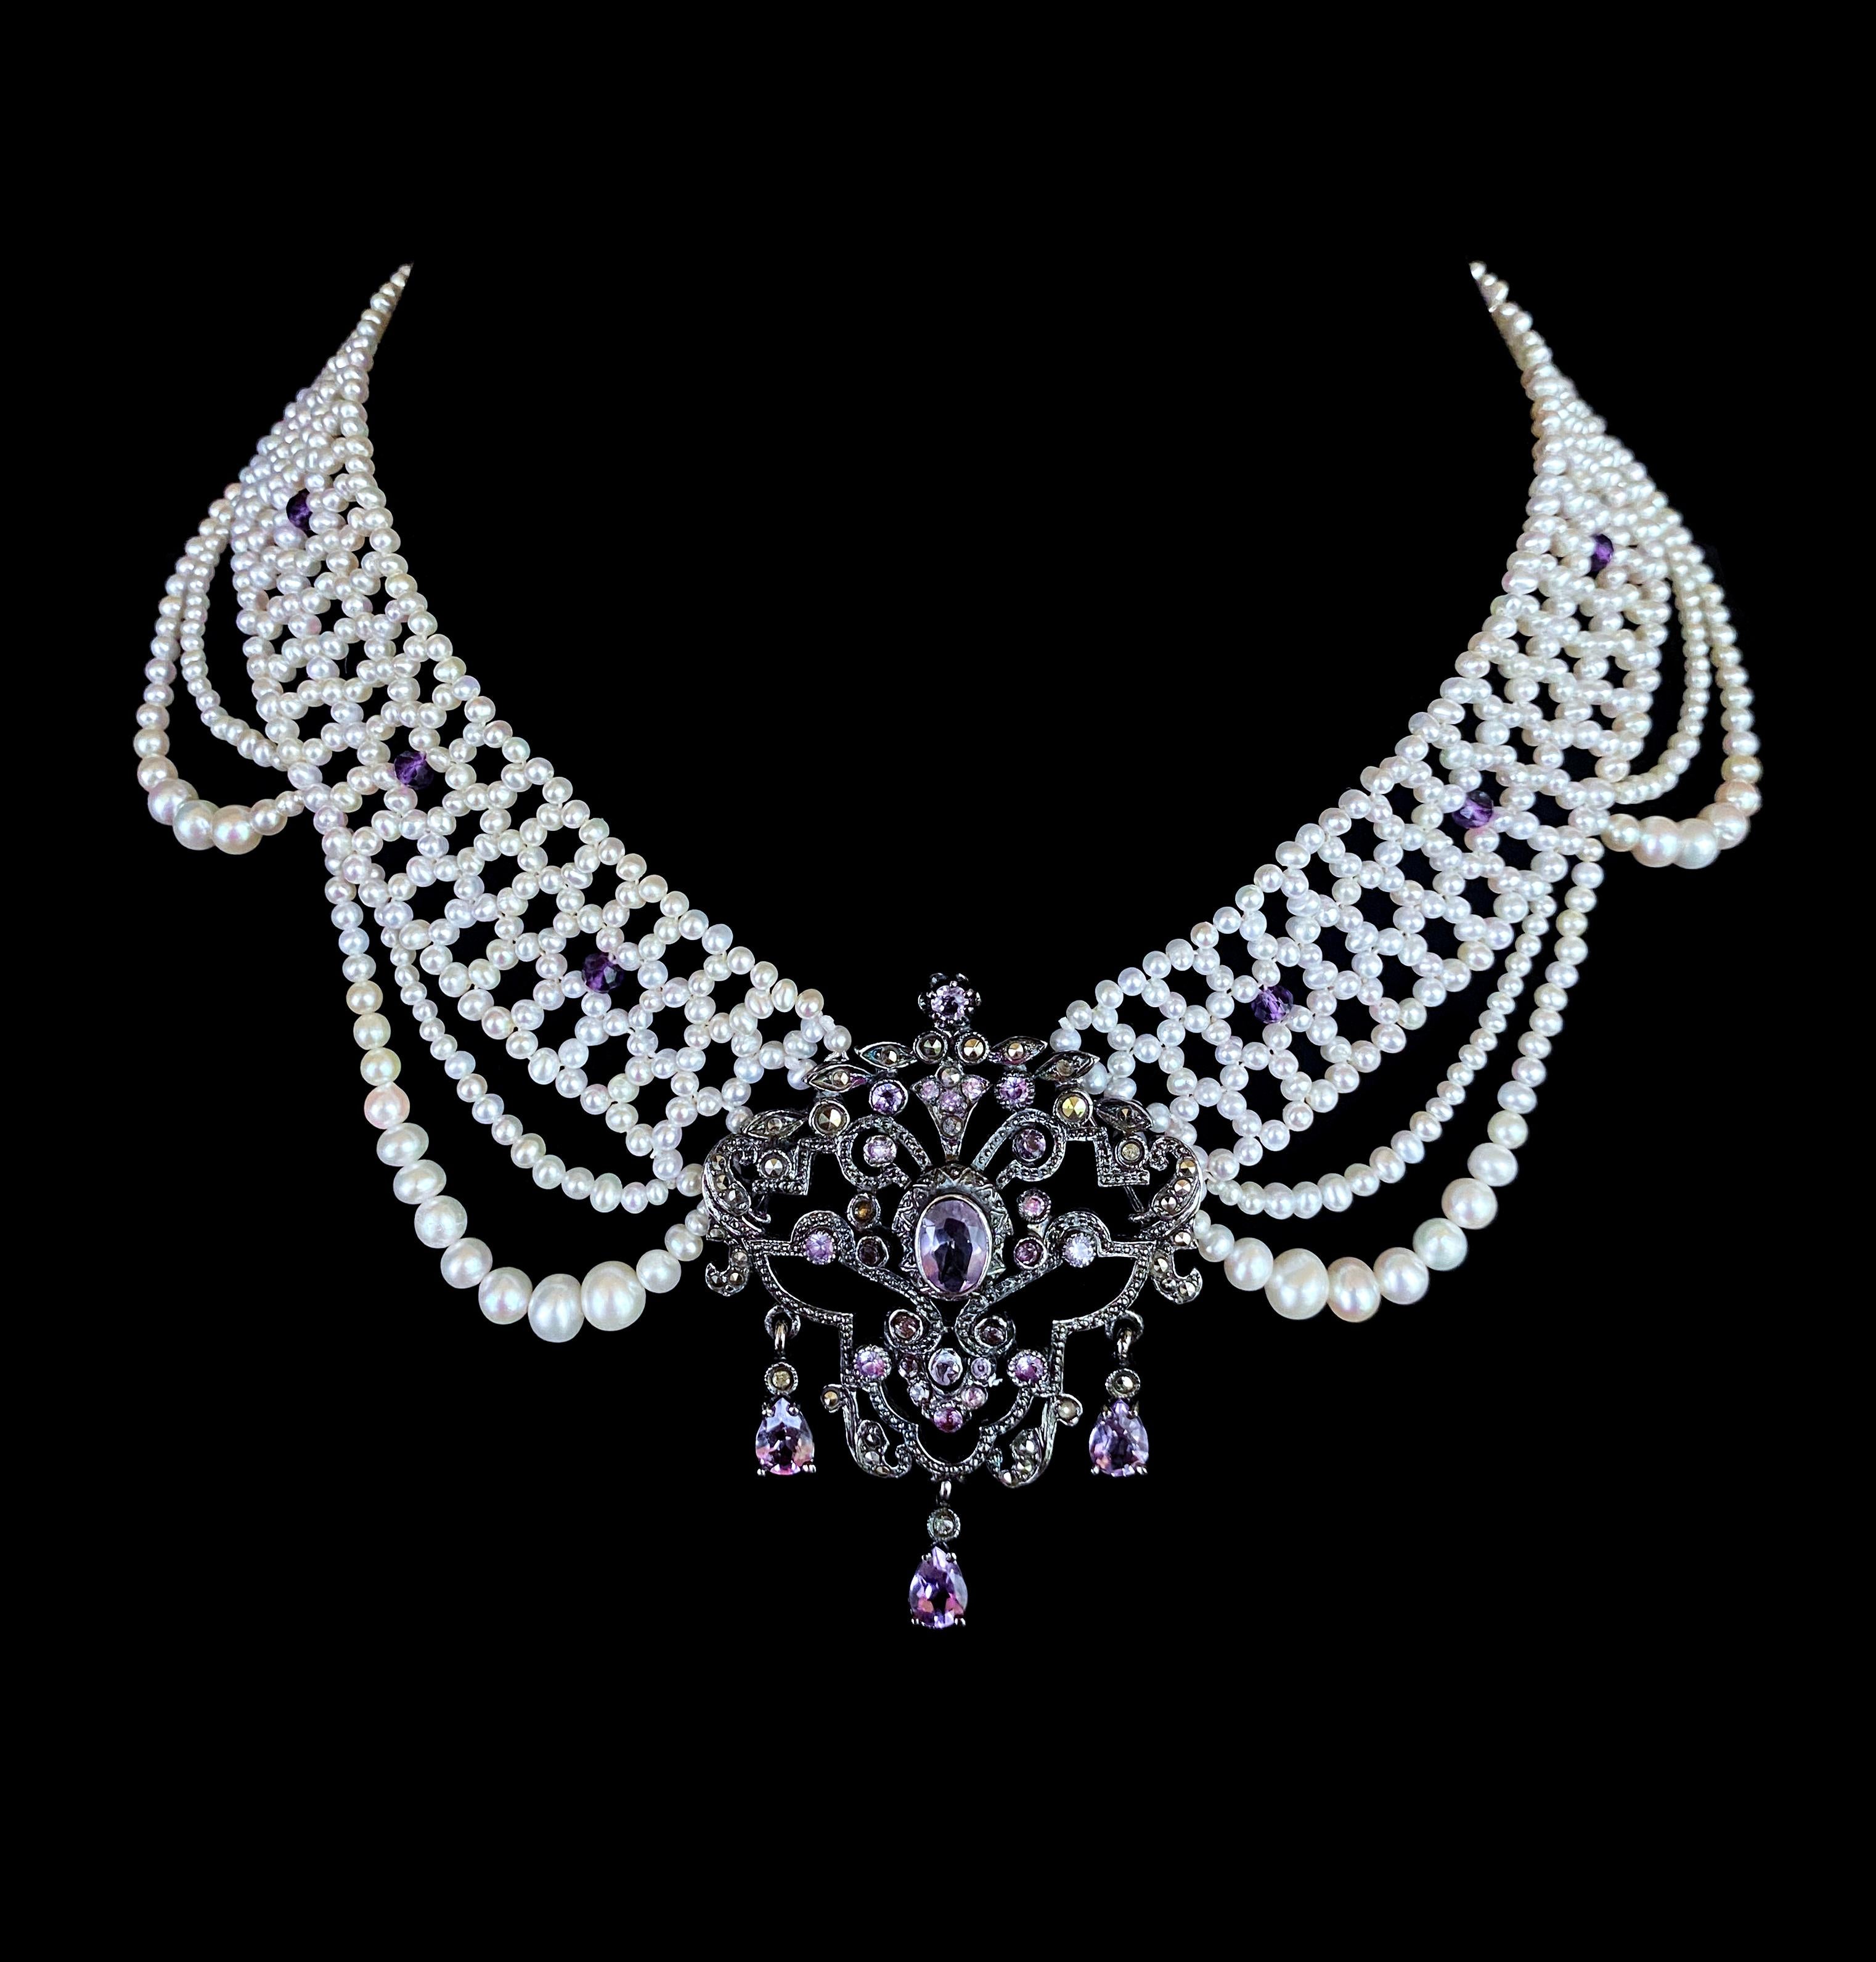 Victorian Marina J. Unique Pearl Draped Necklace with Vintage Amethyst Silver Centerpiece For Sale